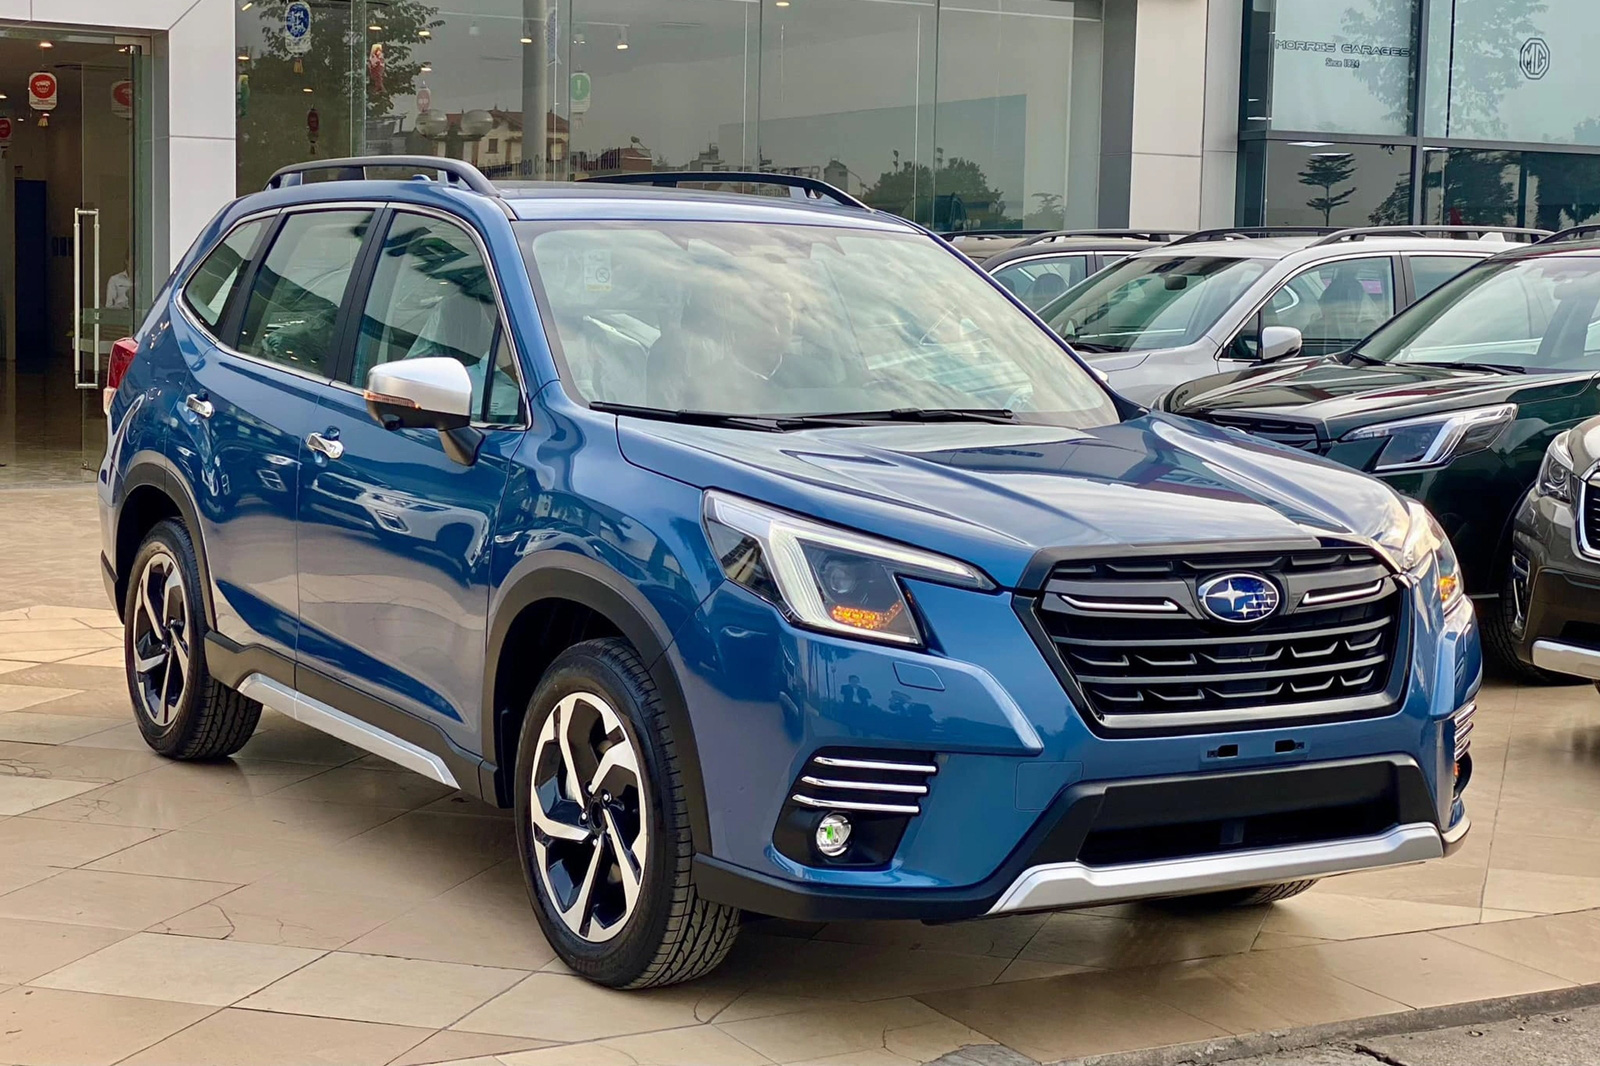 Even though they are all discounted or have strong incentives, the Subaru Forester is the only model that is discounted to match the Mazda CX-5 in terms of selling price - Photo: Subaru Dealer